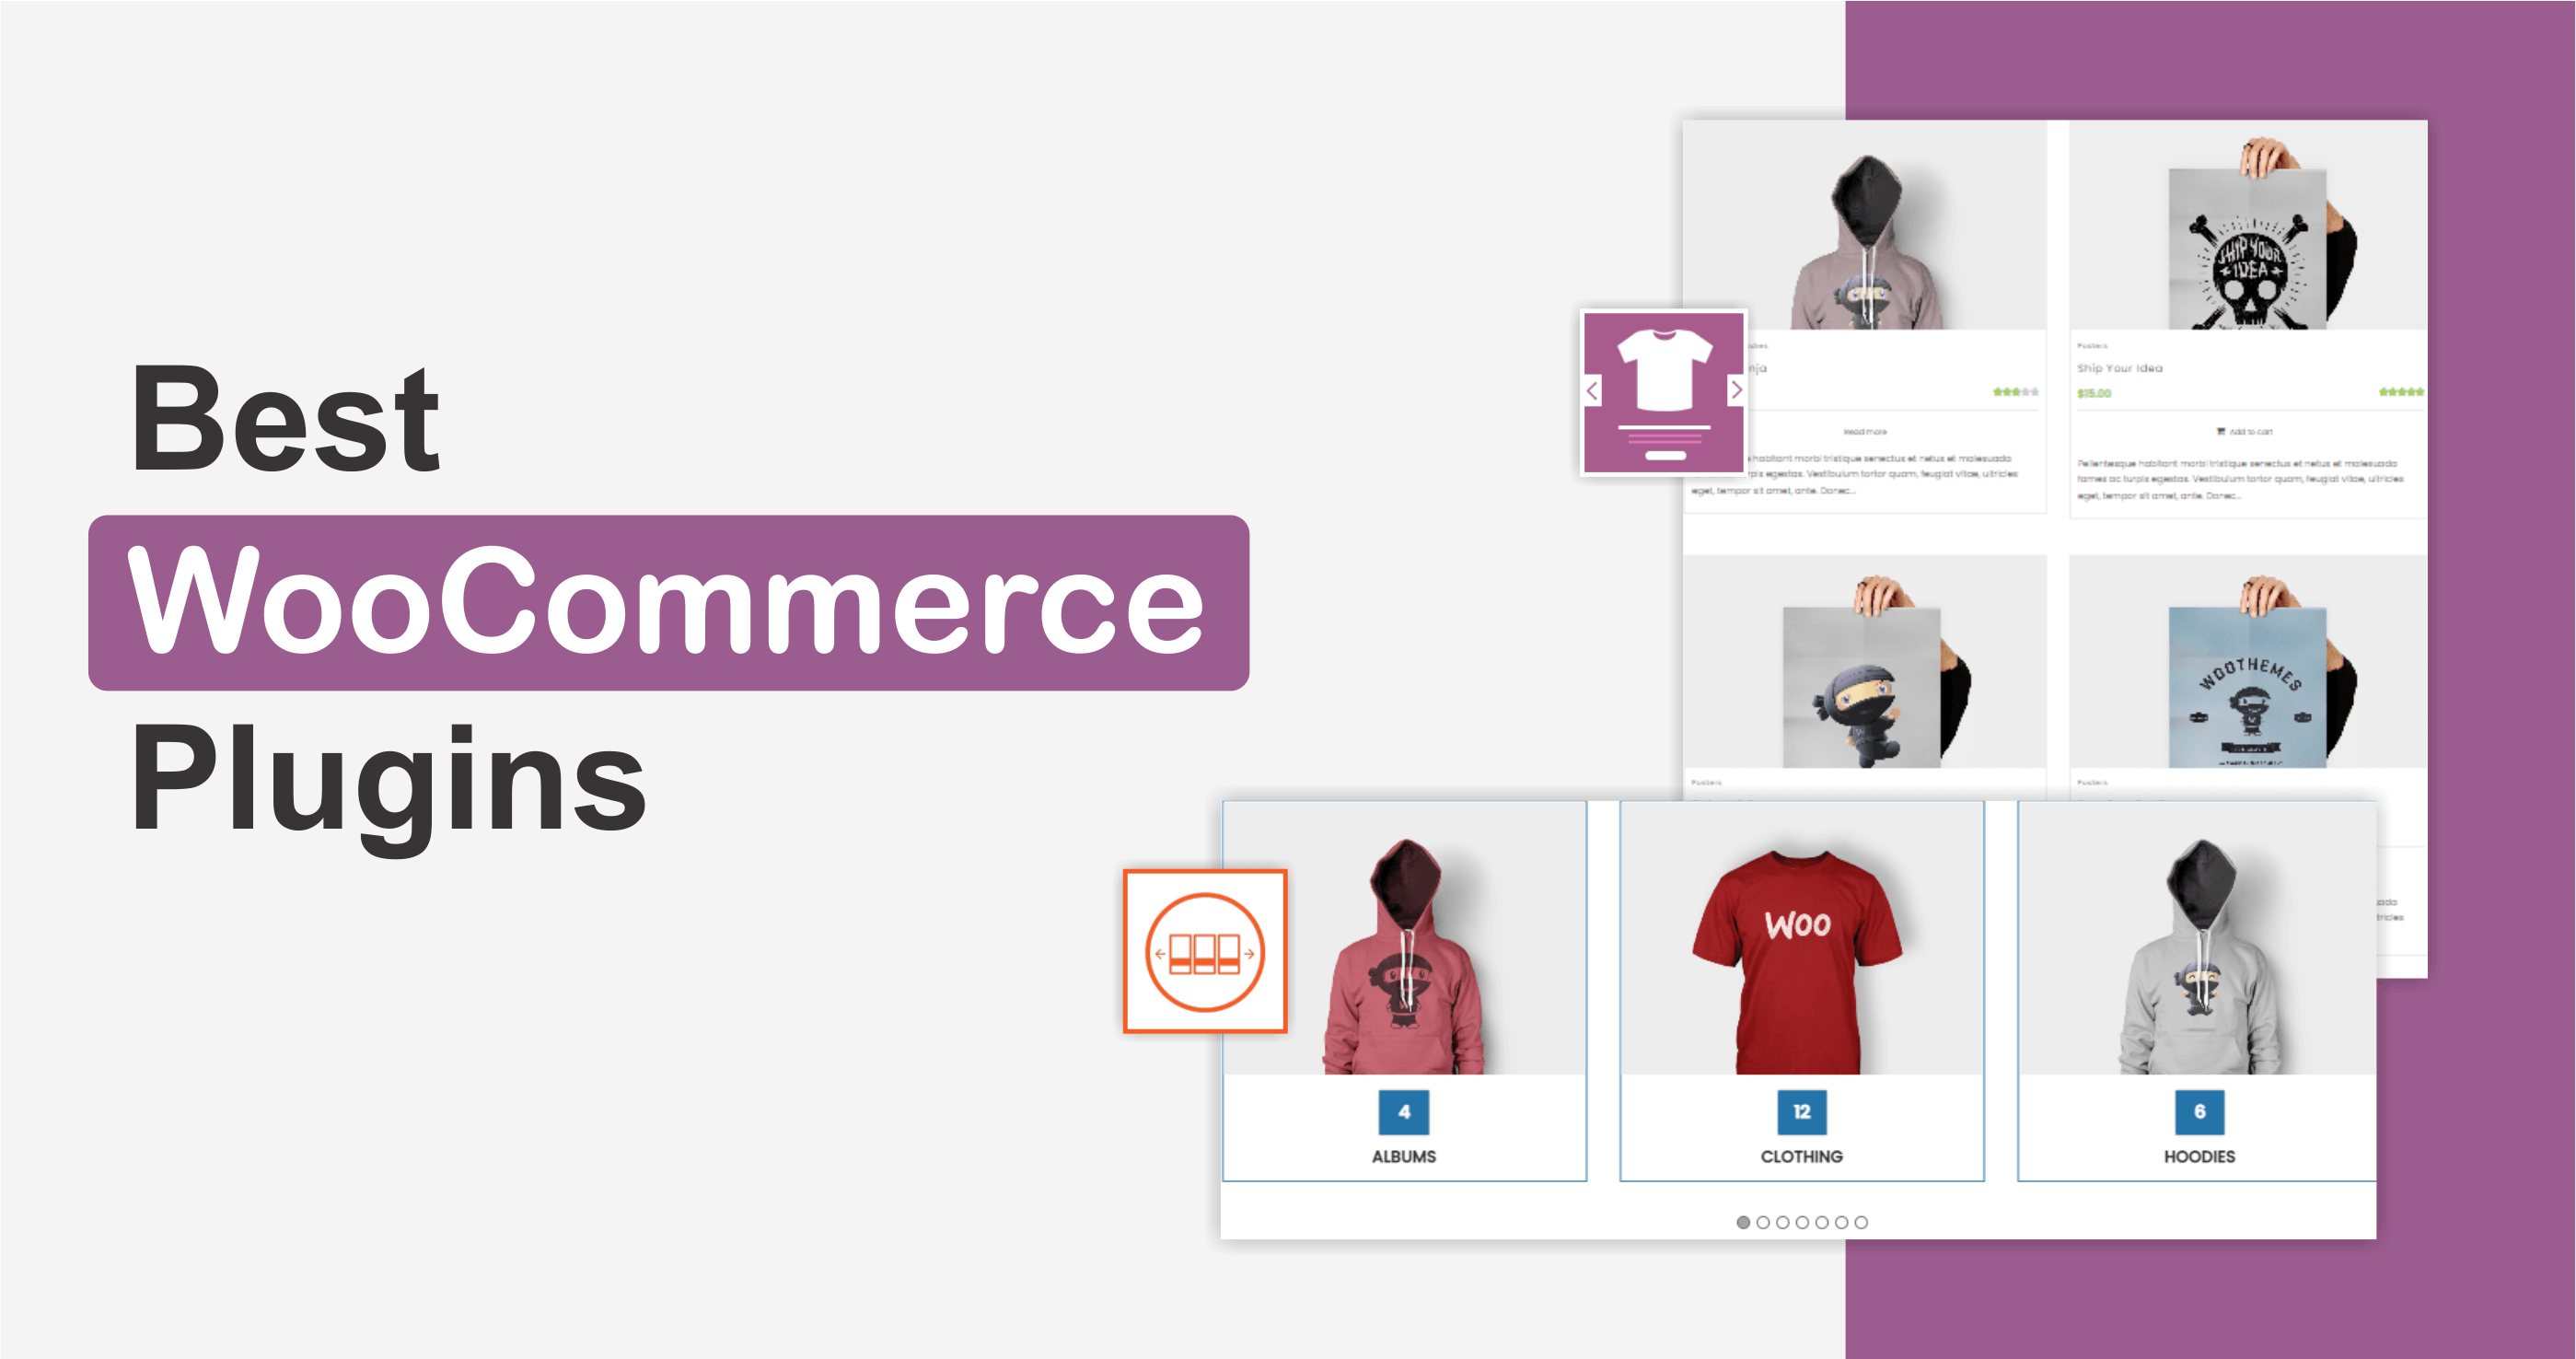 Best WooCommerce Plugins The Ultimate list of Plugins to Make and scale a fully functional WooCommerce store